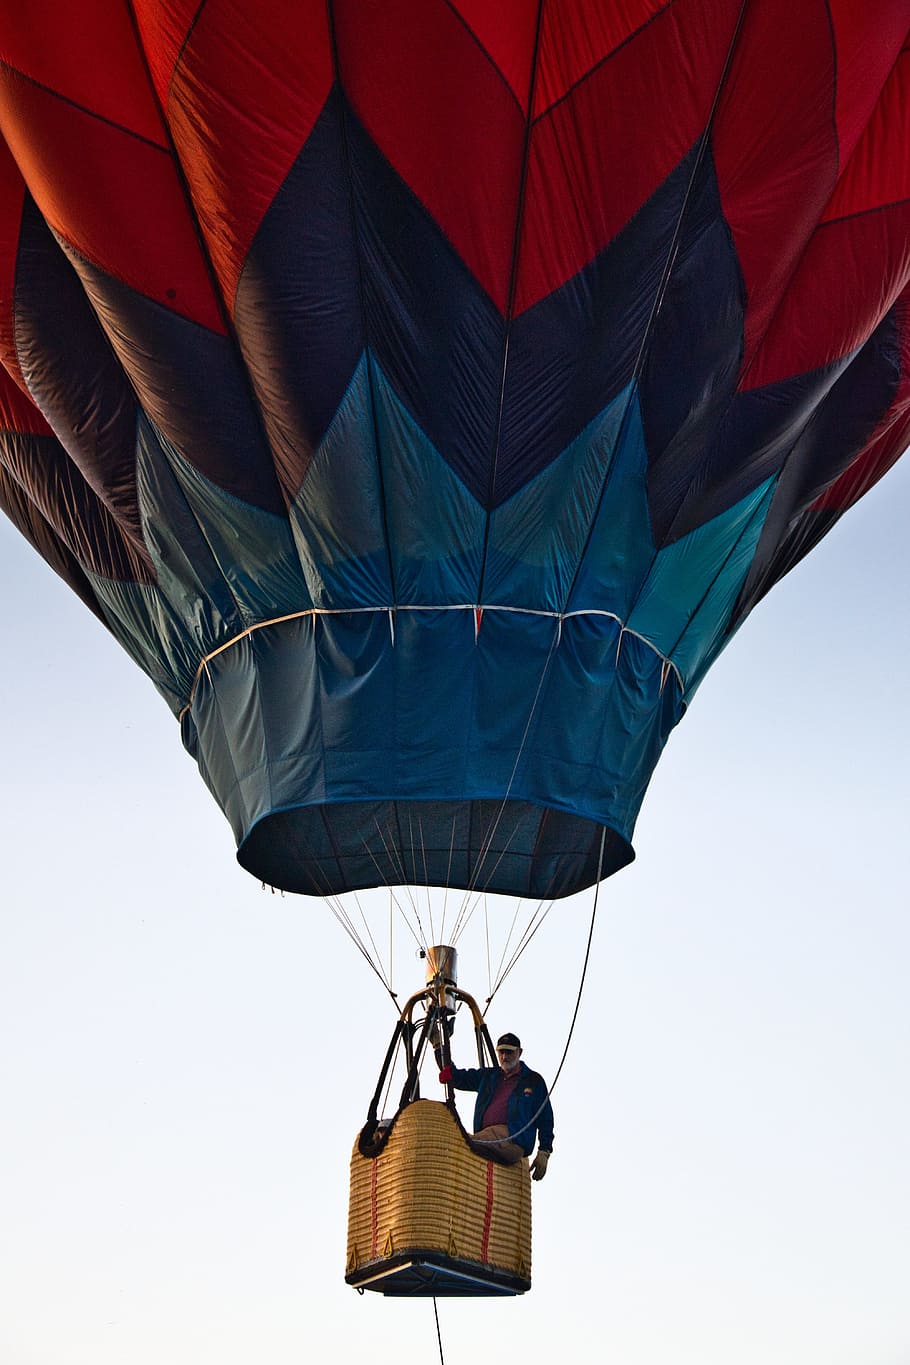 Man Riding Blue and Red Hot Air Balloon during Day, aircraft, HD wallpaper